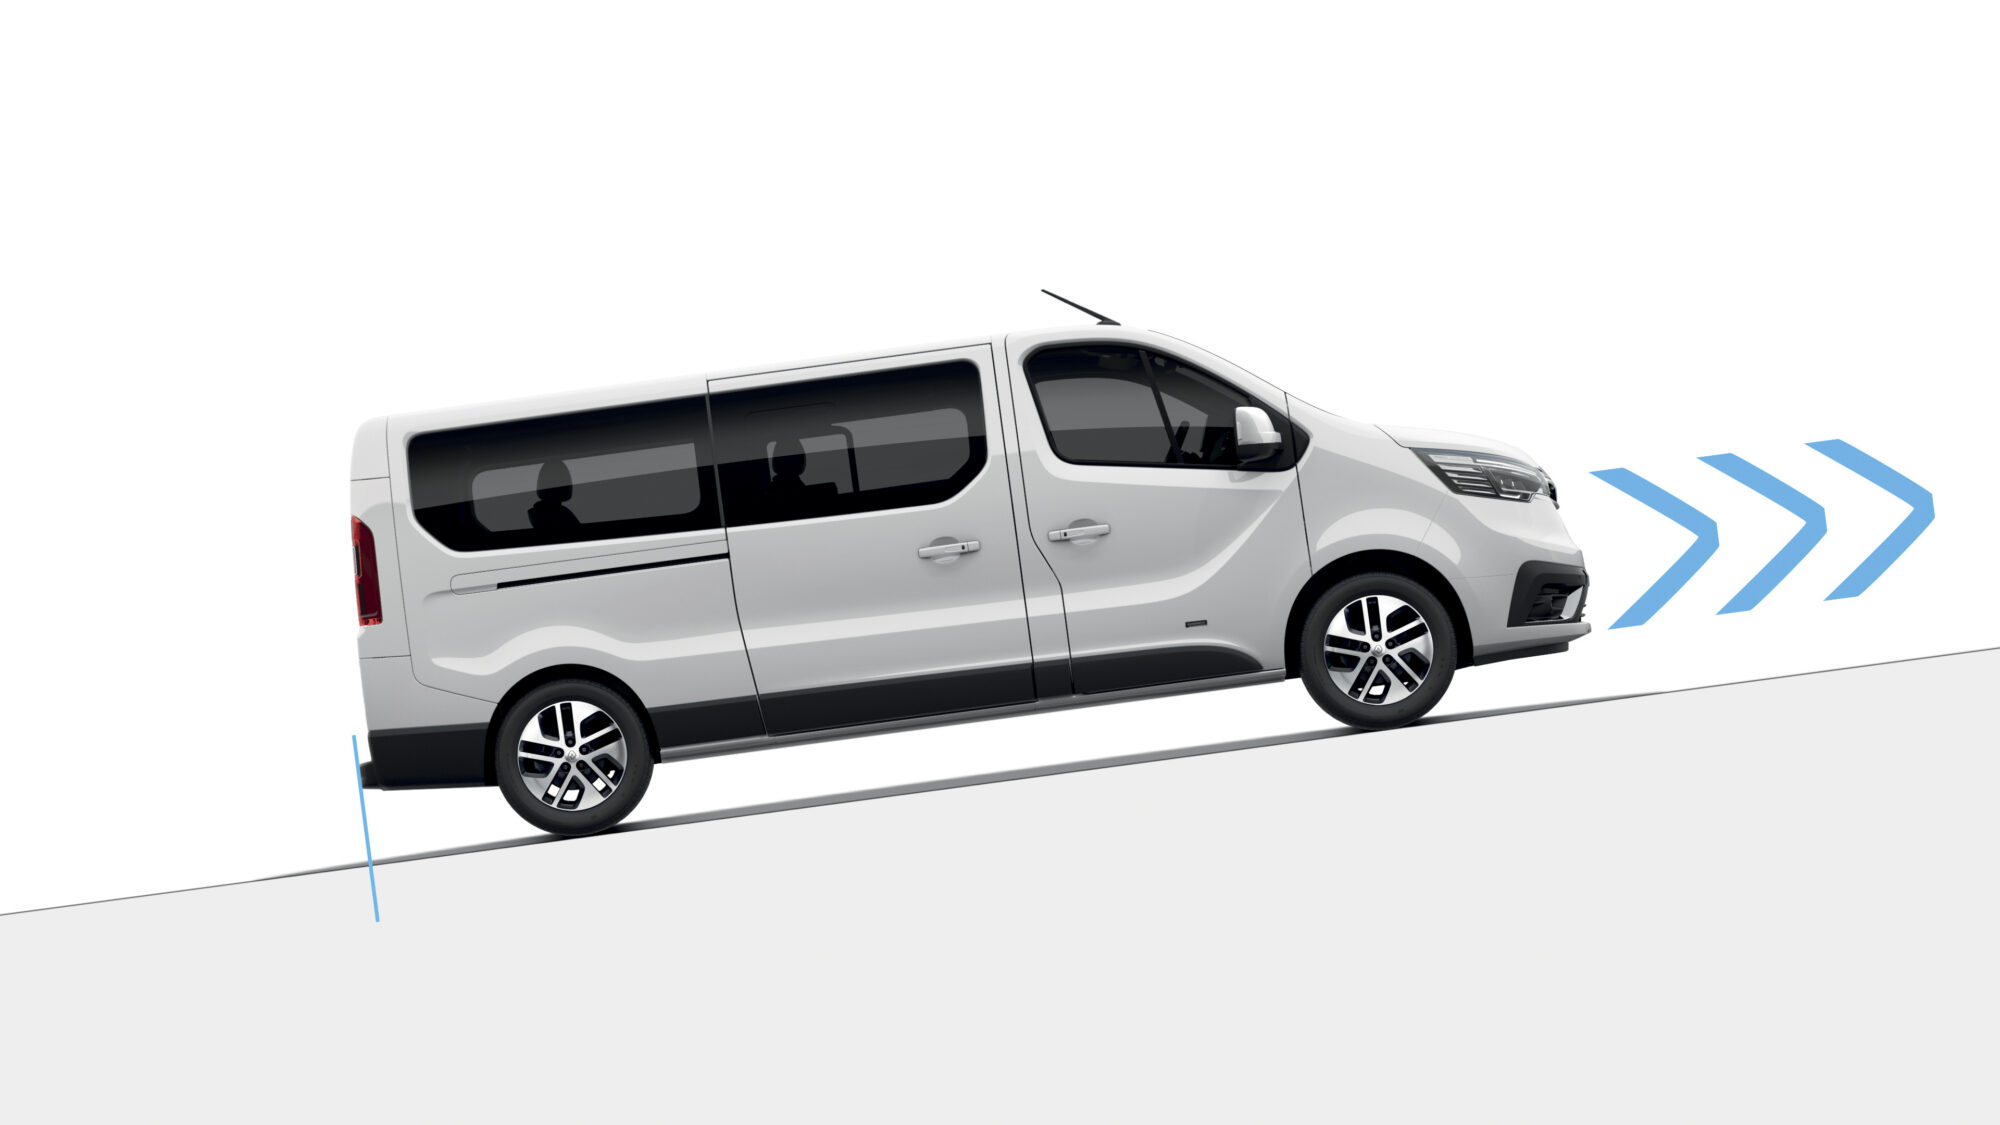 2021 - New Renault Trafic Spaceclass - Technical drawings